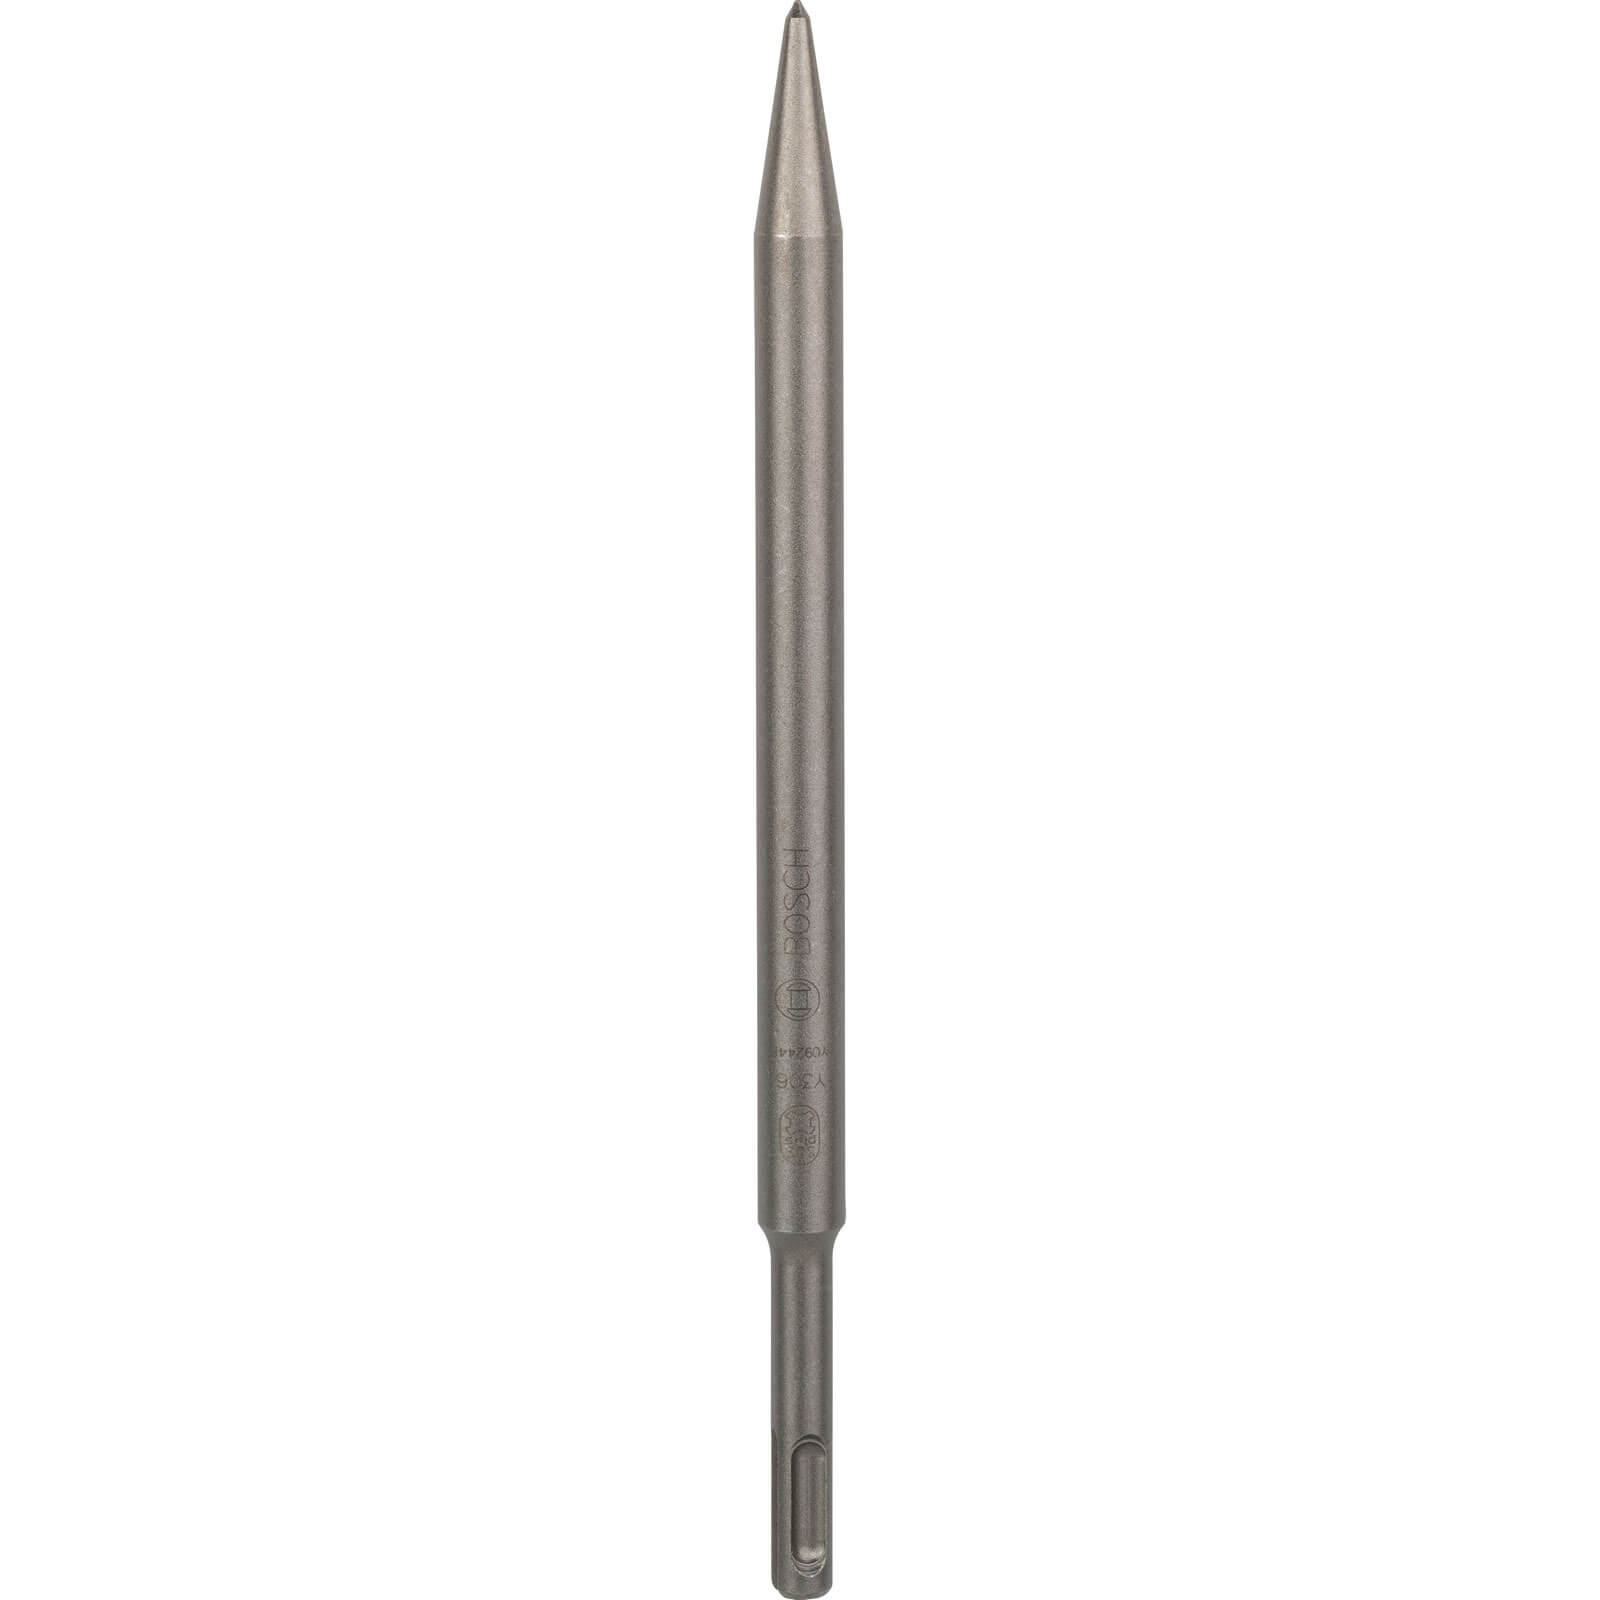 Photo of Bosch Sds Plus Pointed Rotary Chisel 250mm